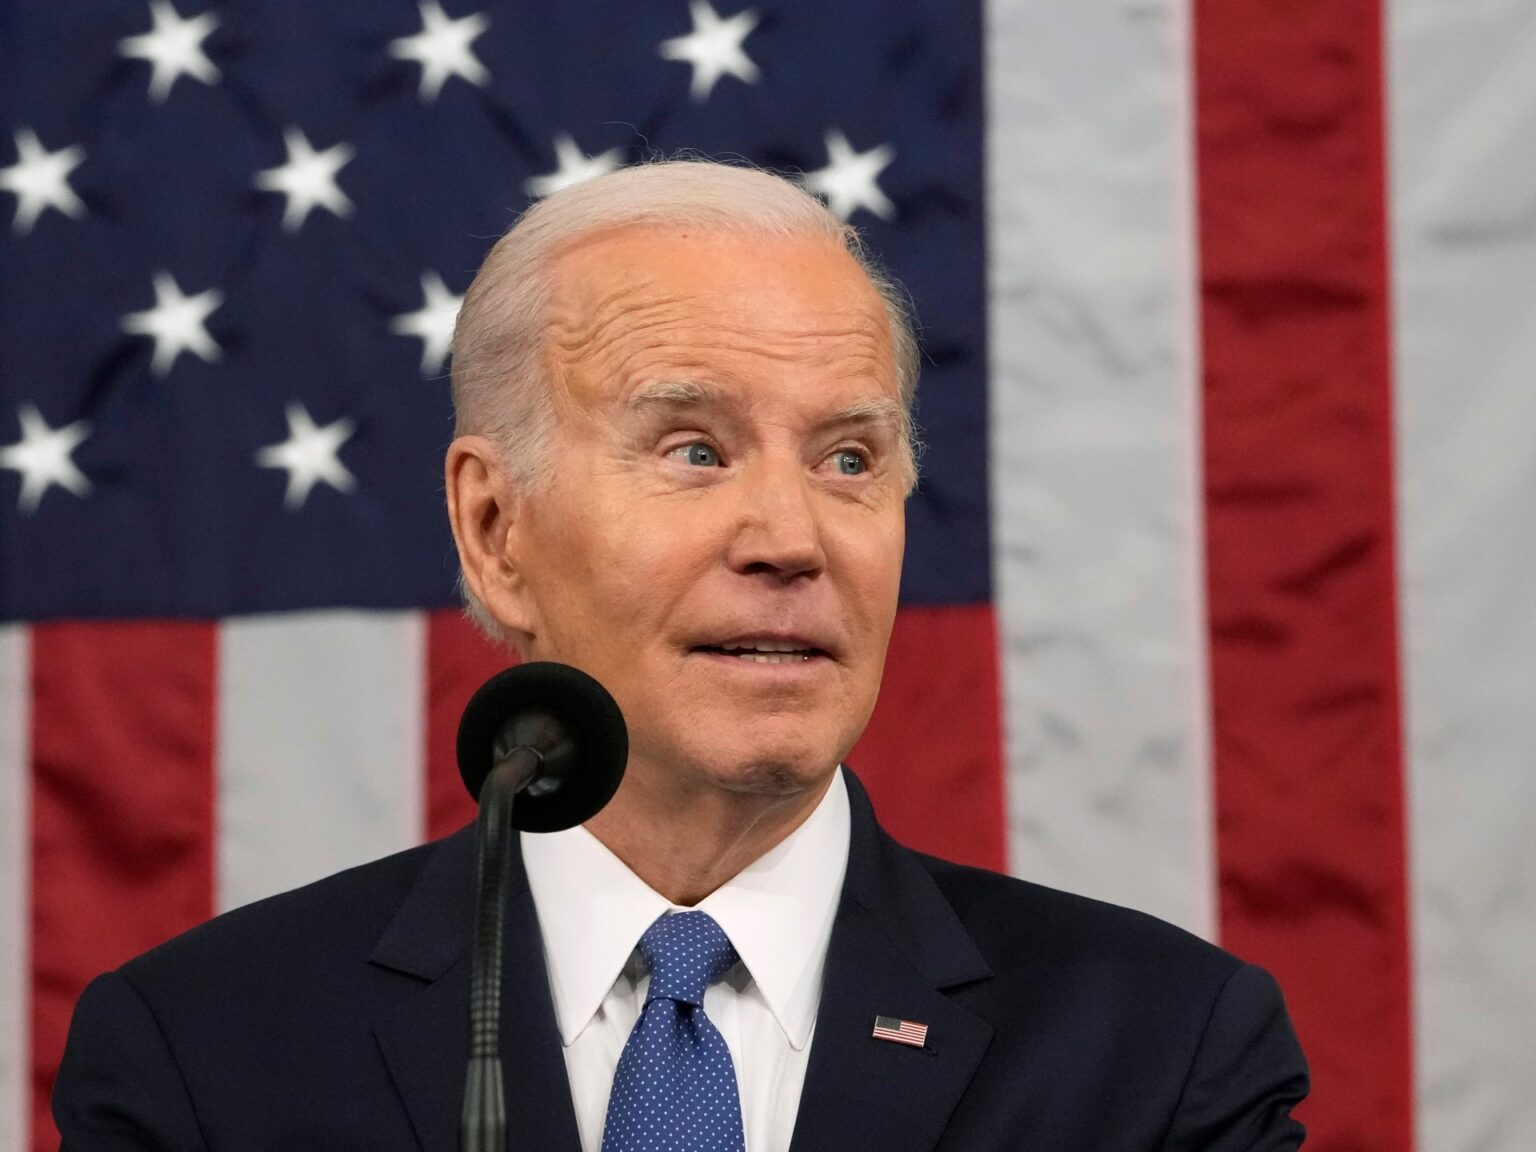 Biden’s Middle East policy is not much different